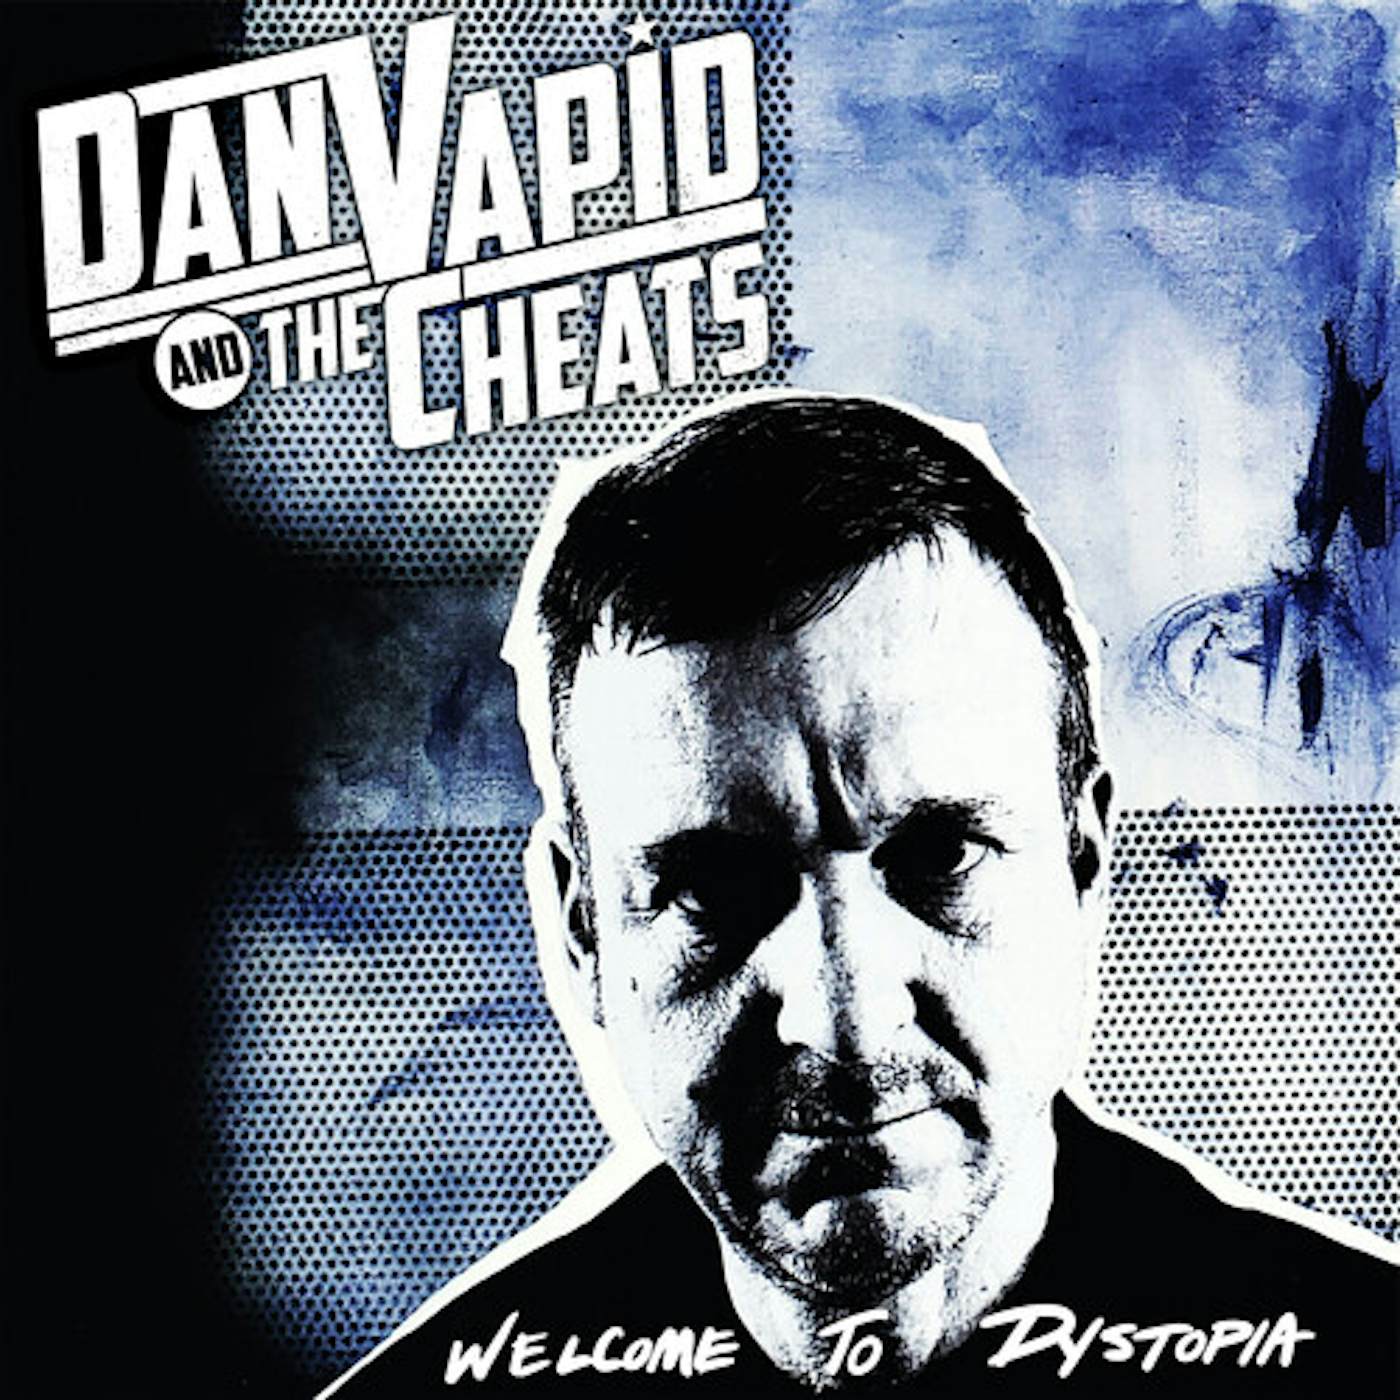 Dan Vapid & the Cheats WELCOME TO DYSTOPIA CD